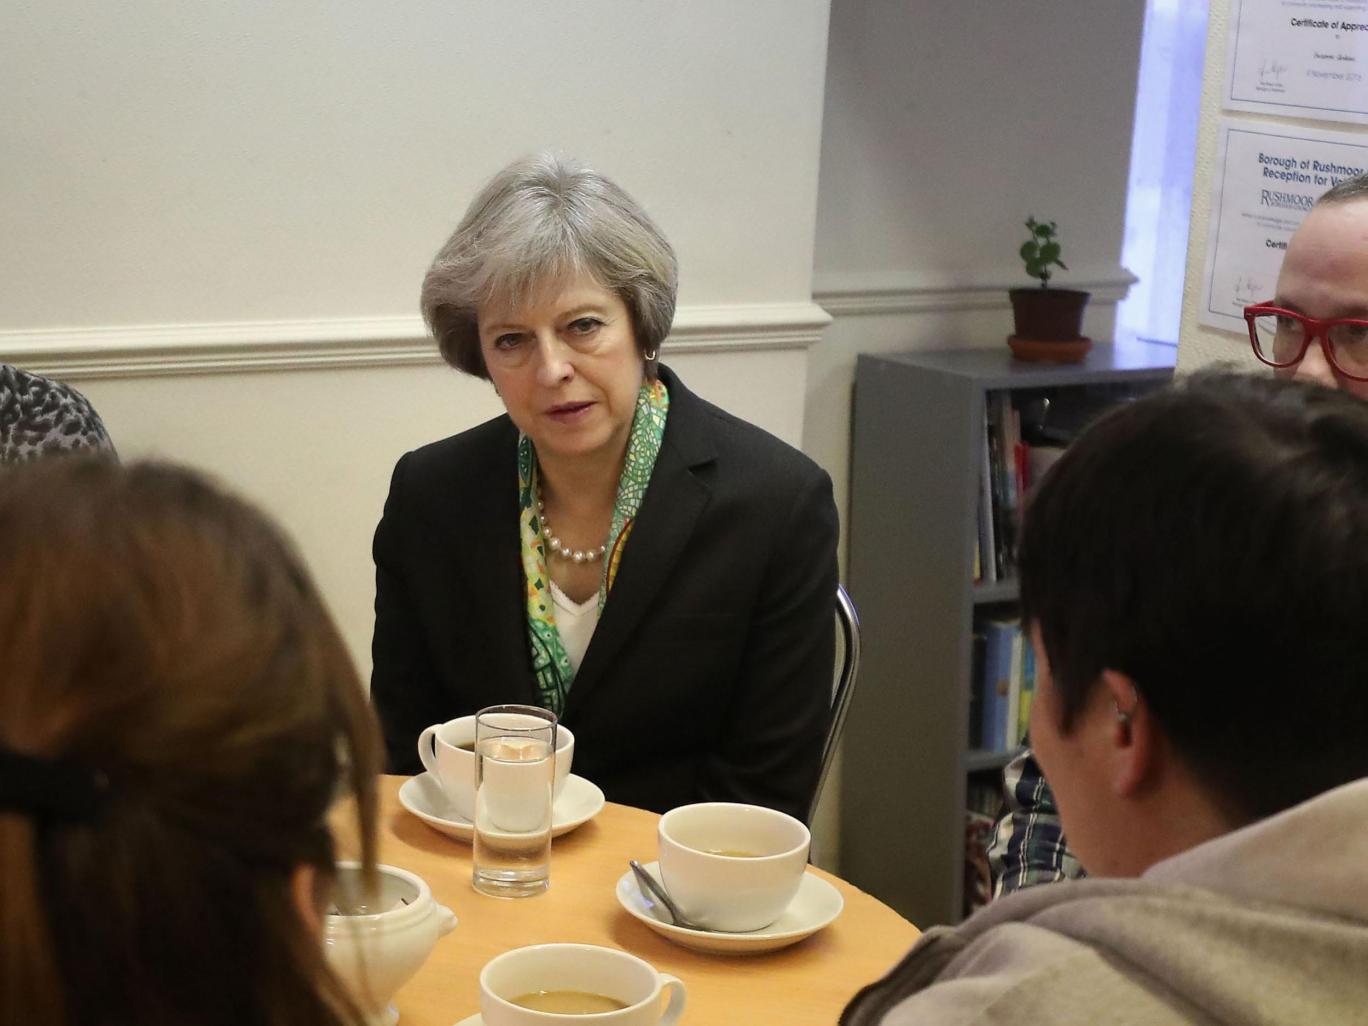 A cup of tea won't solve this one - Tories are determined to focus on more mild mental health problems